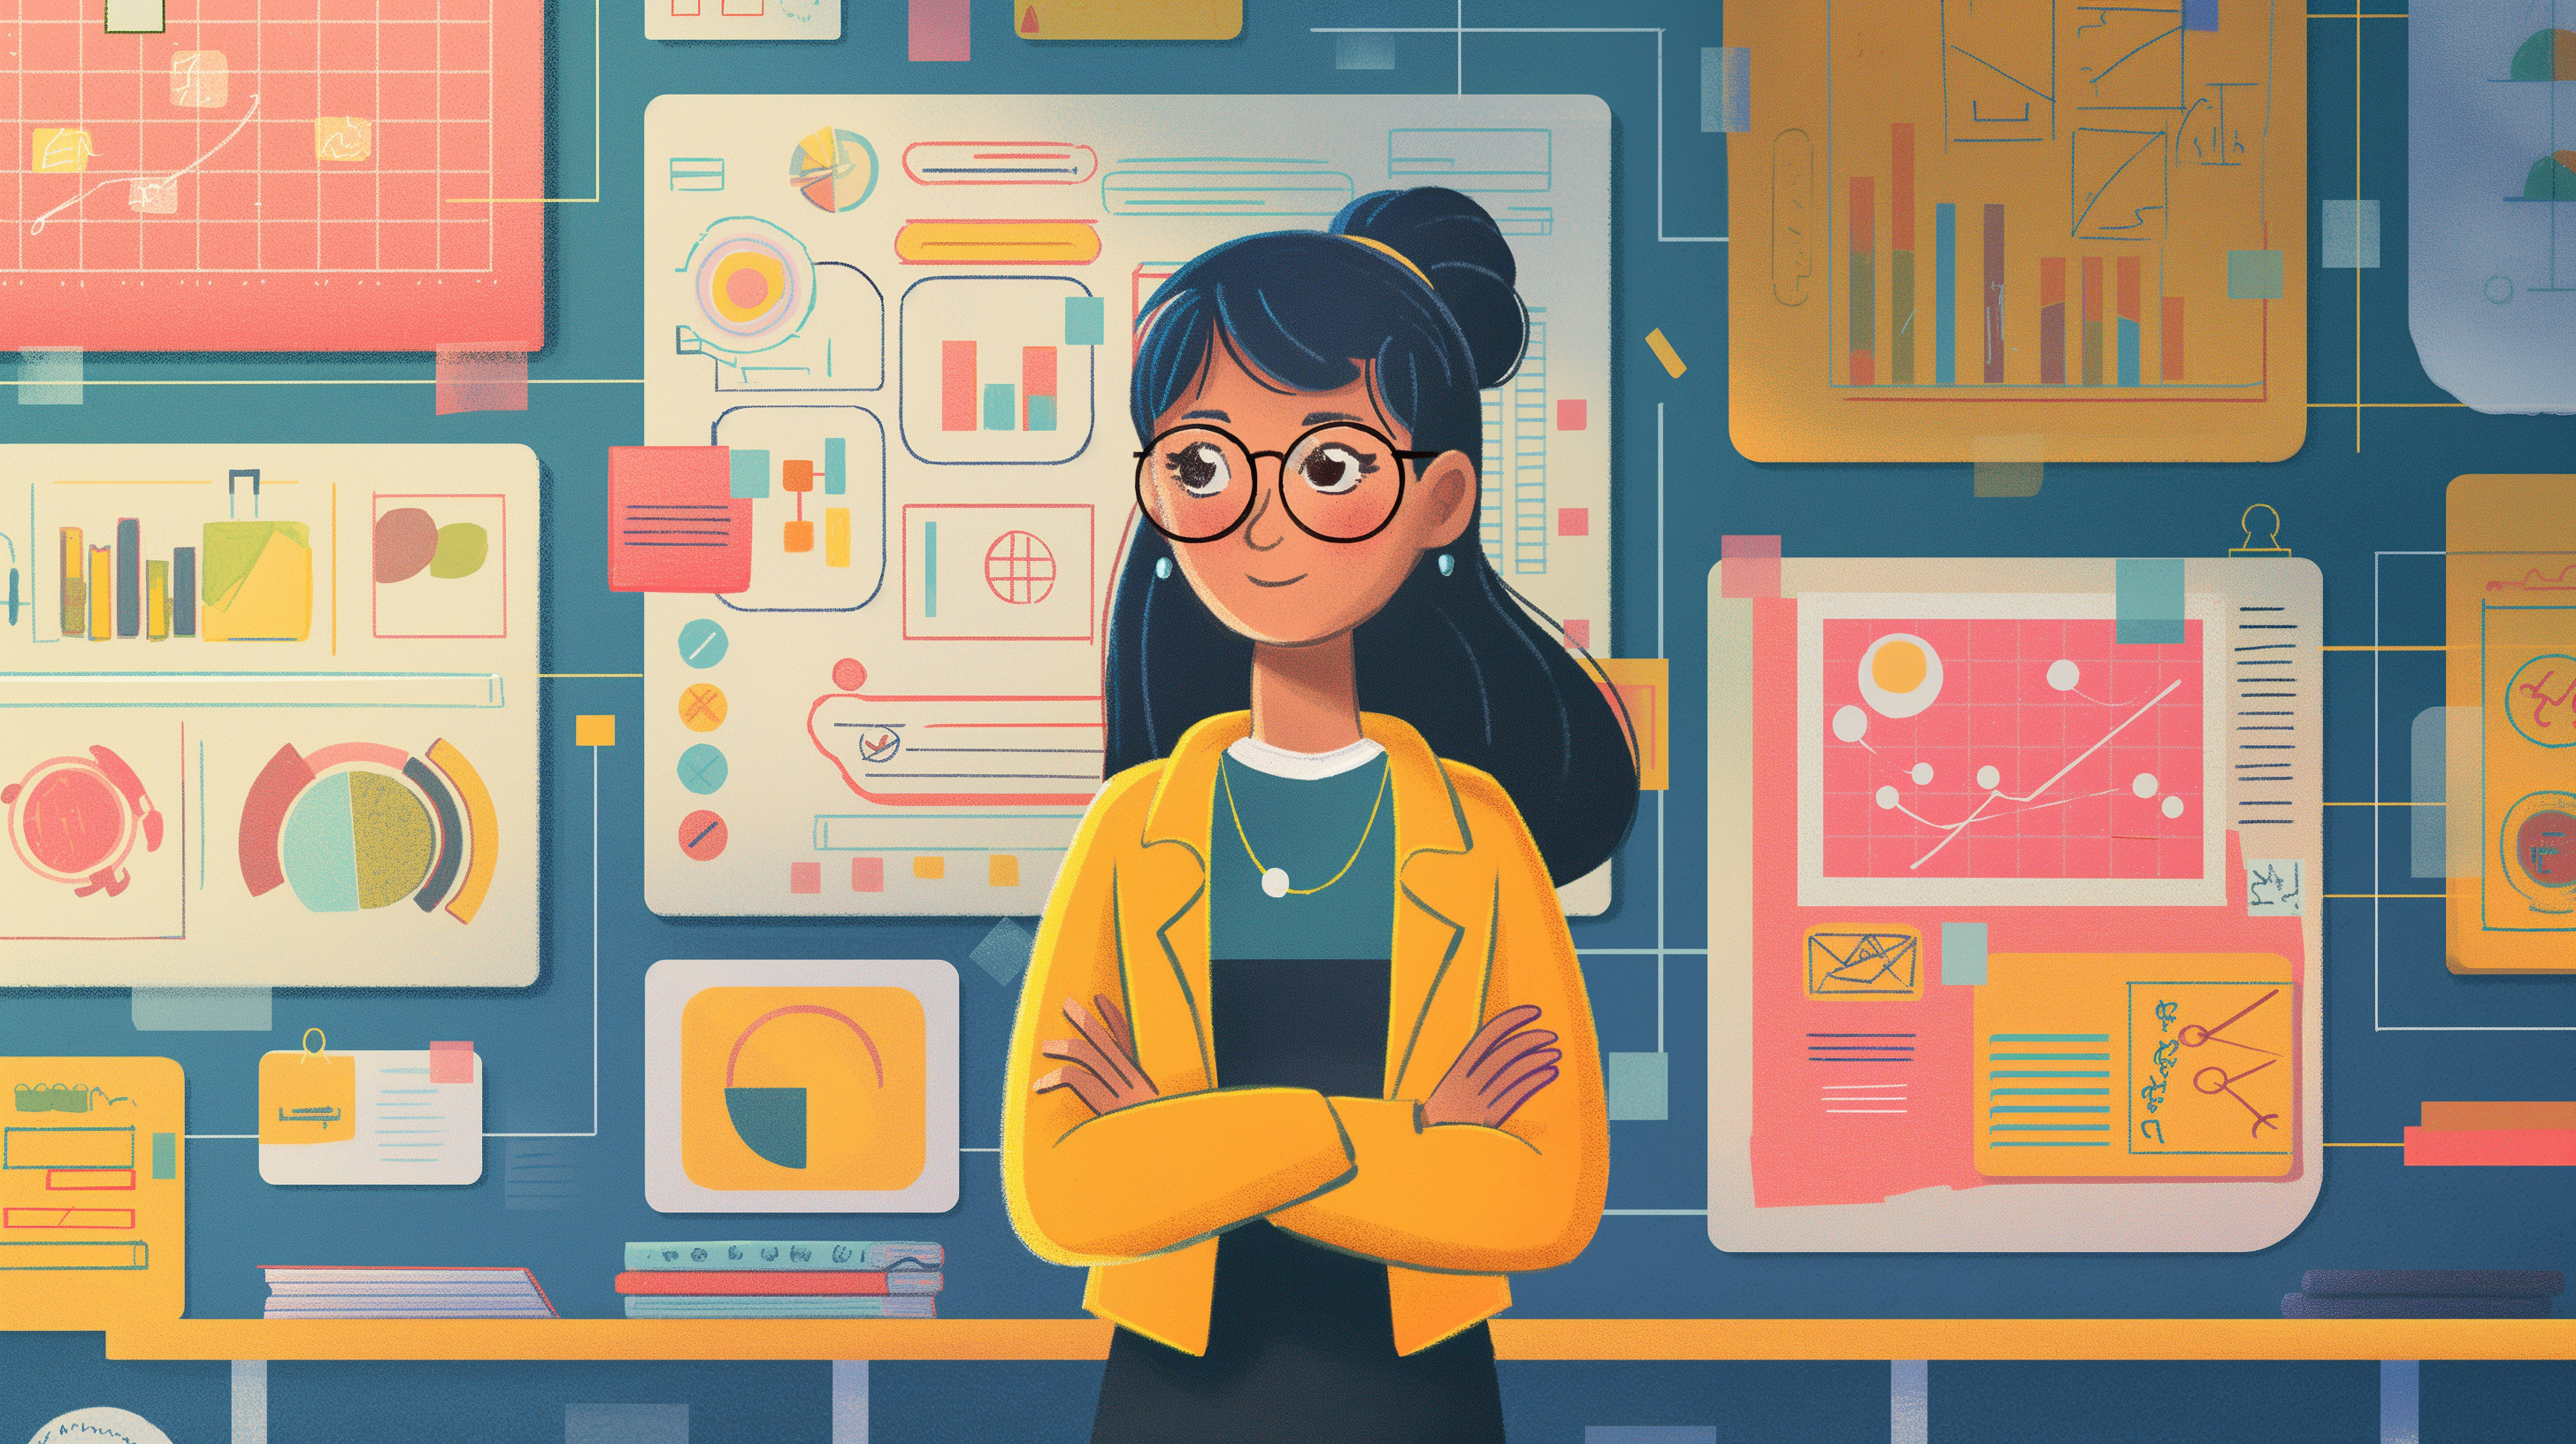 A vibrant illustration of a young woman with glasses and long dark hair tied back, standing confidently with her arms crossed. She is wearing a yellow blazer and a teal shirt. Behind her, a wall filled with colorful charts, graphs, and data visualizations creates an engaging and dynamic background, suggesting a focus on data analysis and presentation.